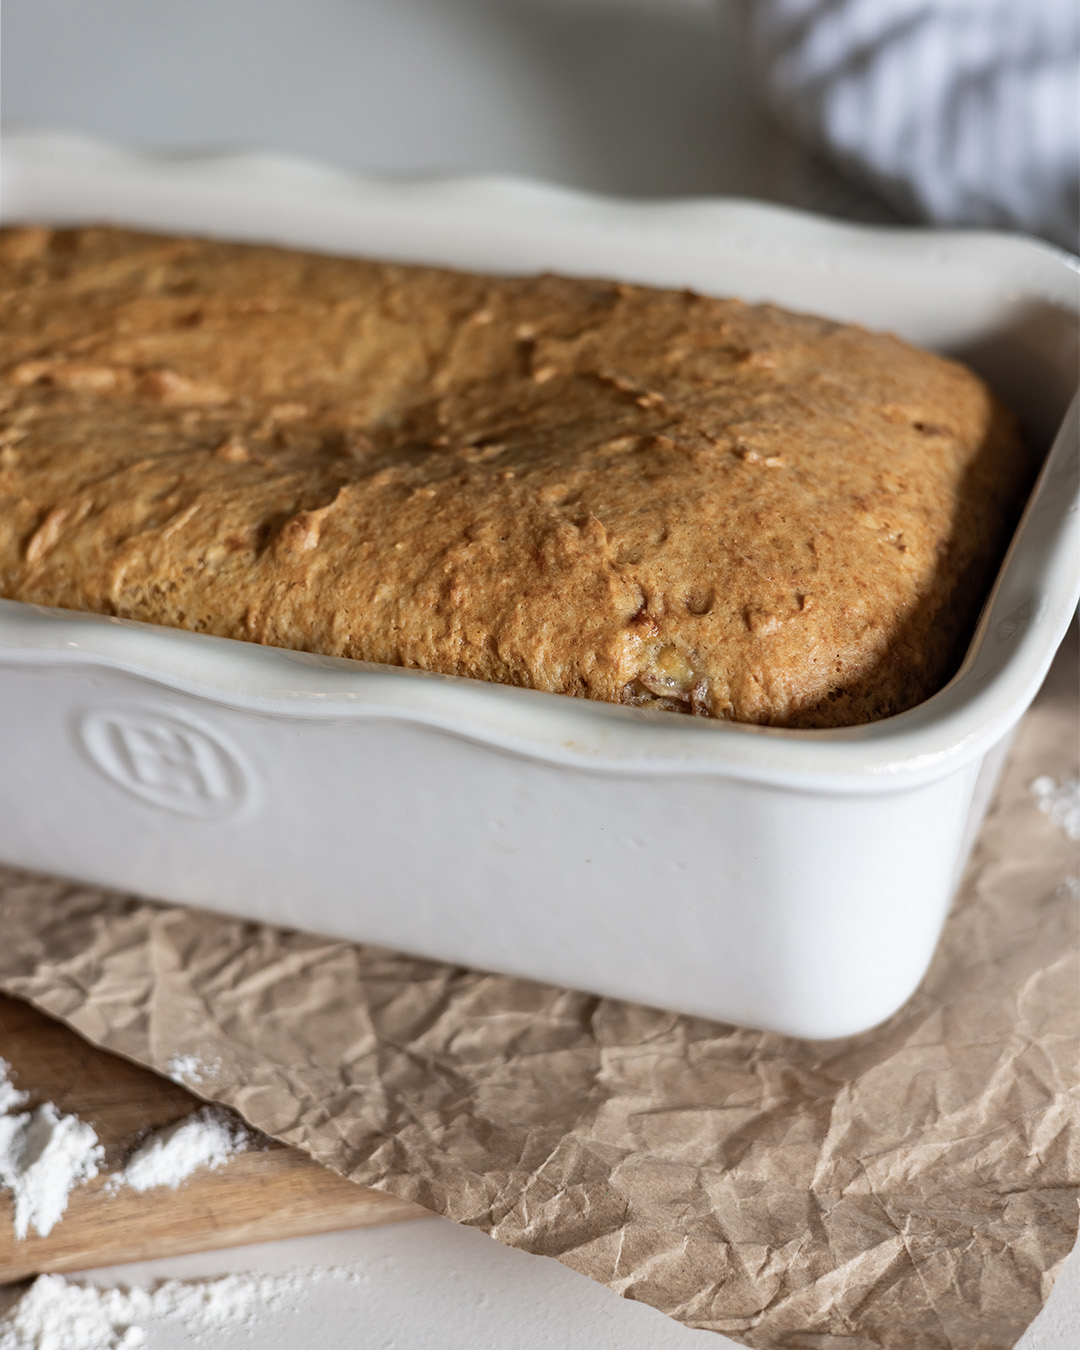 Three ingredient banana bread in an Emile Henry ruffled loaf baker.